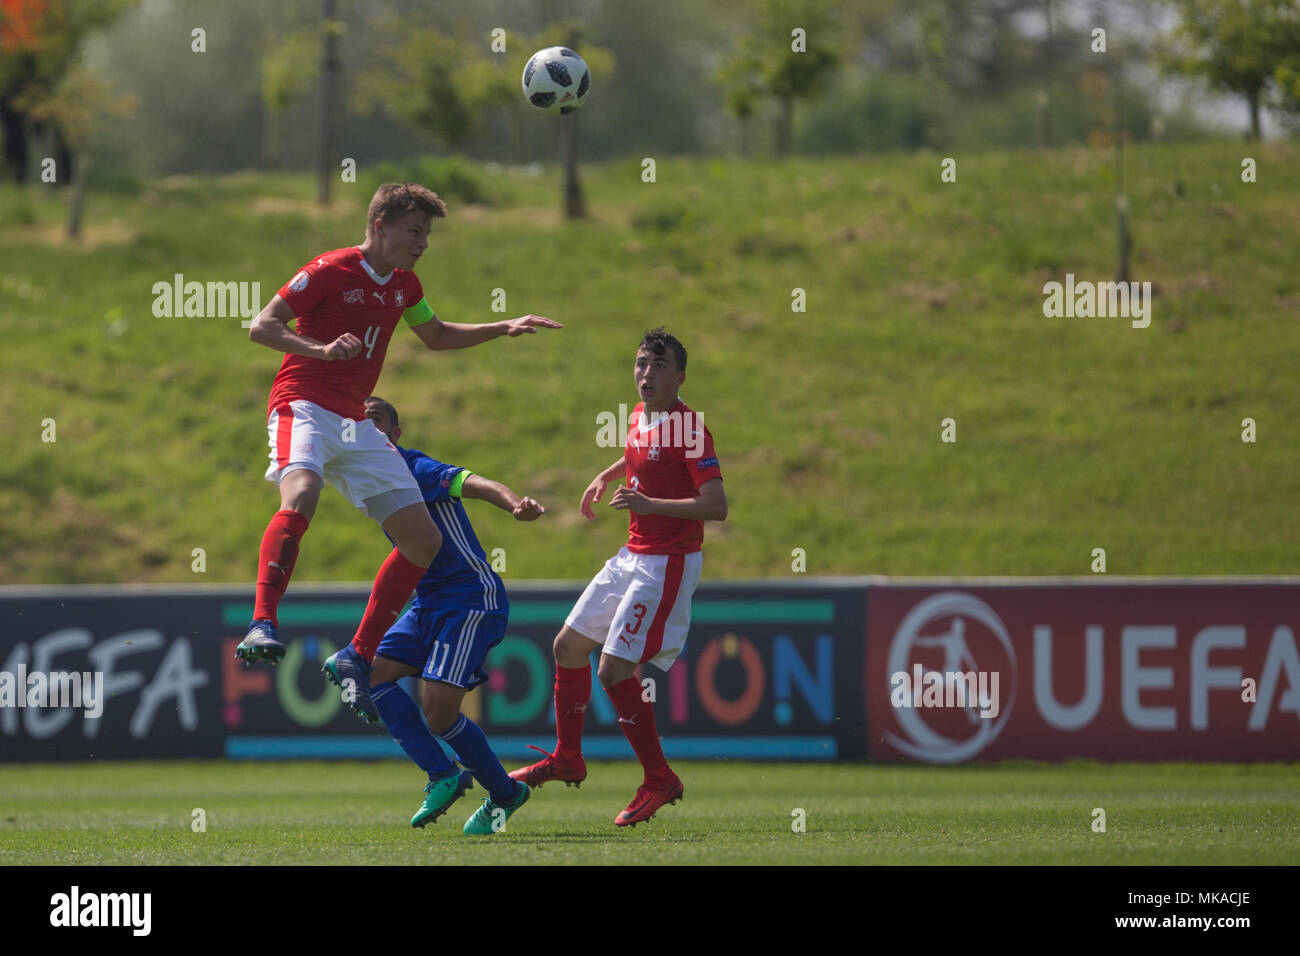 Ilan Sauter (Switzerland) head clear during the 2018 UEFA European Under-17 Championship Group A match between Switzerland and Israel at St George's Park on May 7th 2018 in Burton upon Trent, England. (Photo by Richard Burley/phcimages.com) Stock Photo